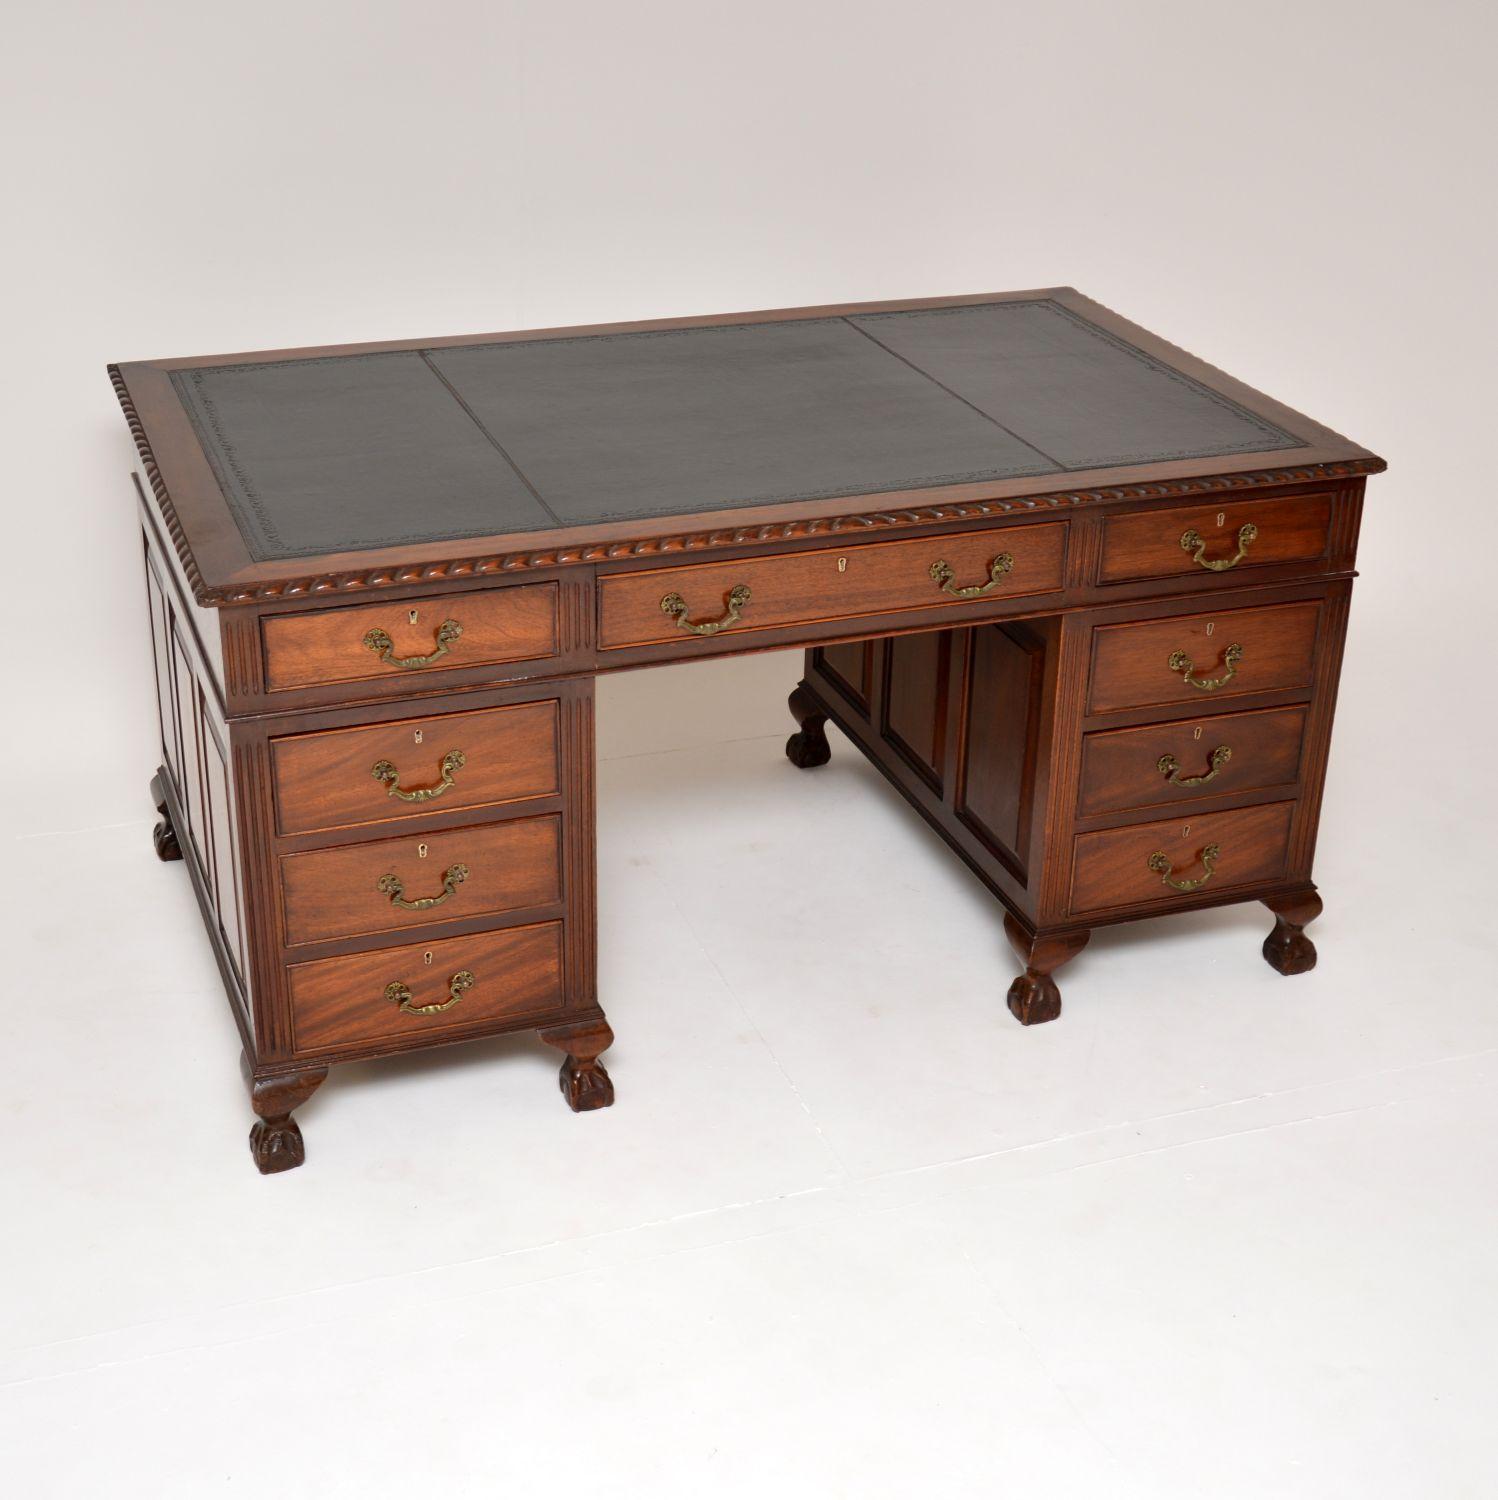 An excellent antique desk in the classic Chippendale style. This was made in England, it dates from around the 1900-1920 period.

It has a fantastic design and is of amazing quality. The top has gadrooned edges, there are panelled sides and